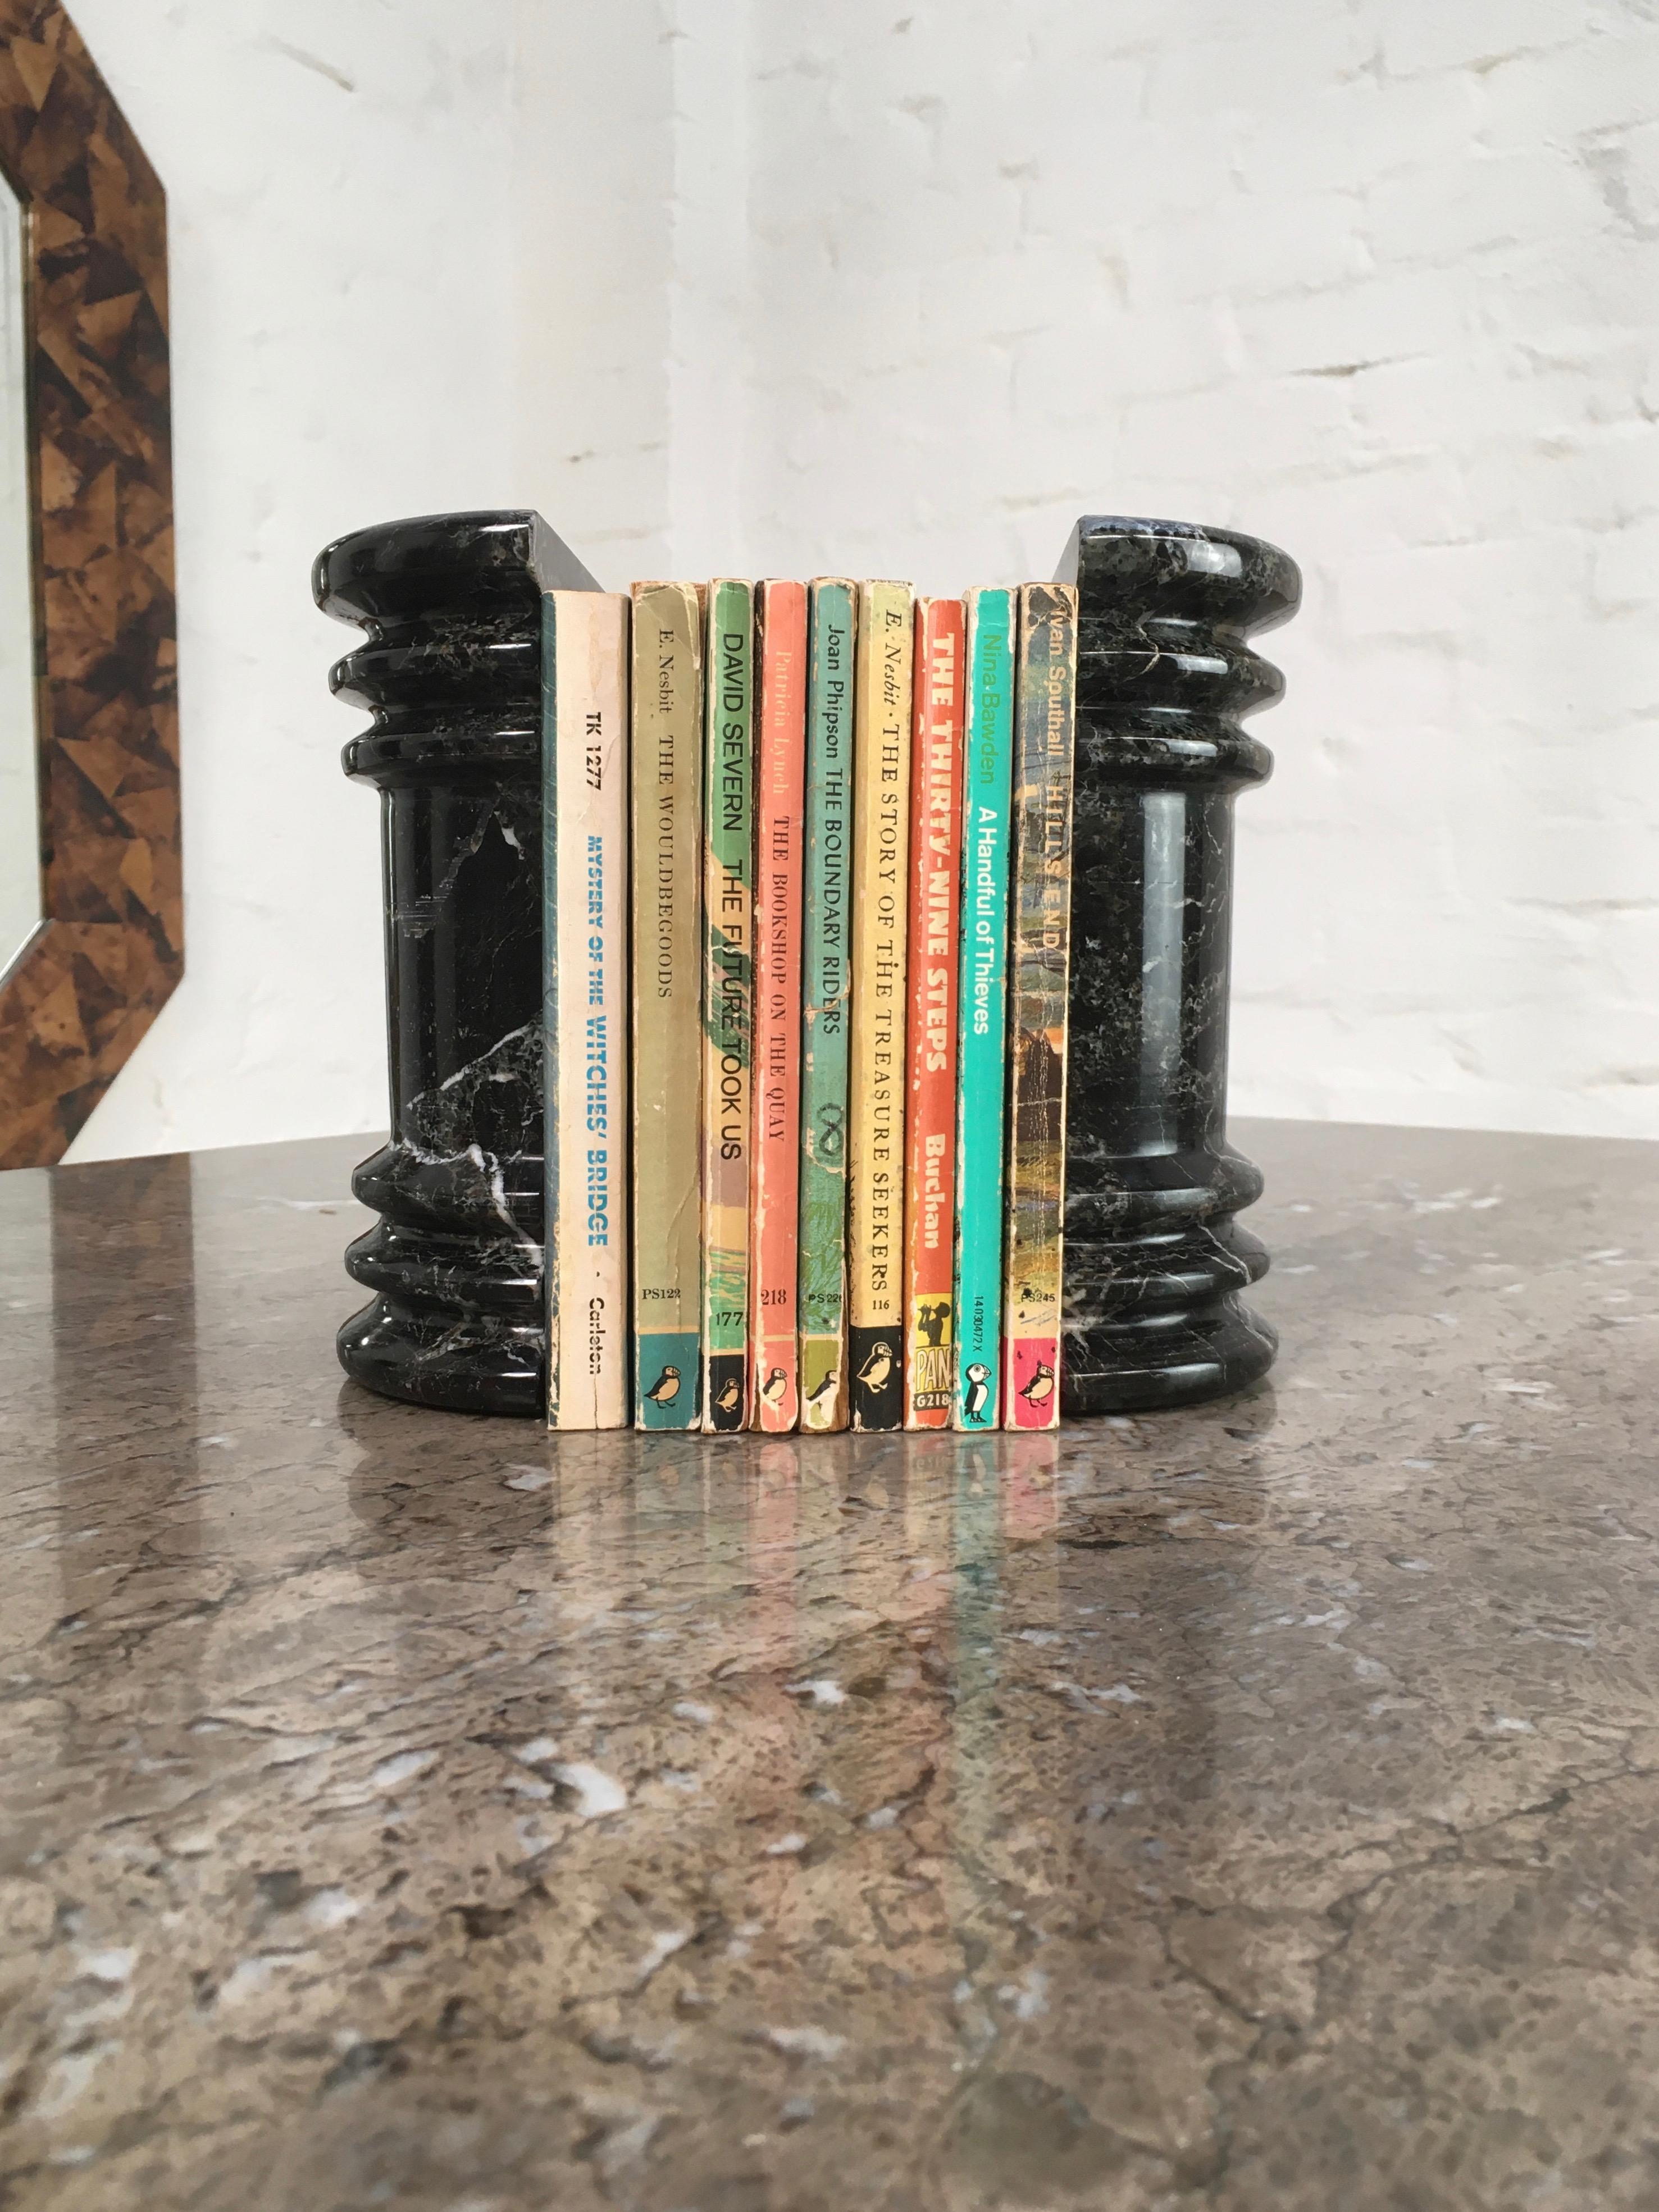 A pair of substantial bookends with great decorative appeal. These column or pedestal bookends can hold up a good heft of books but are not too heavy to be easily handled and moved about to create the best decorative effect.

The black marble is